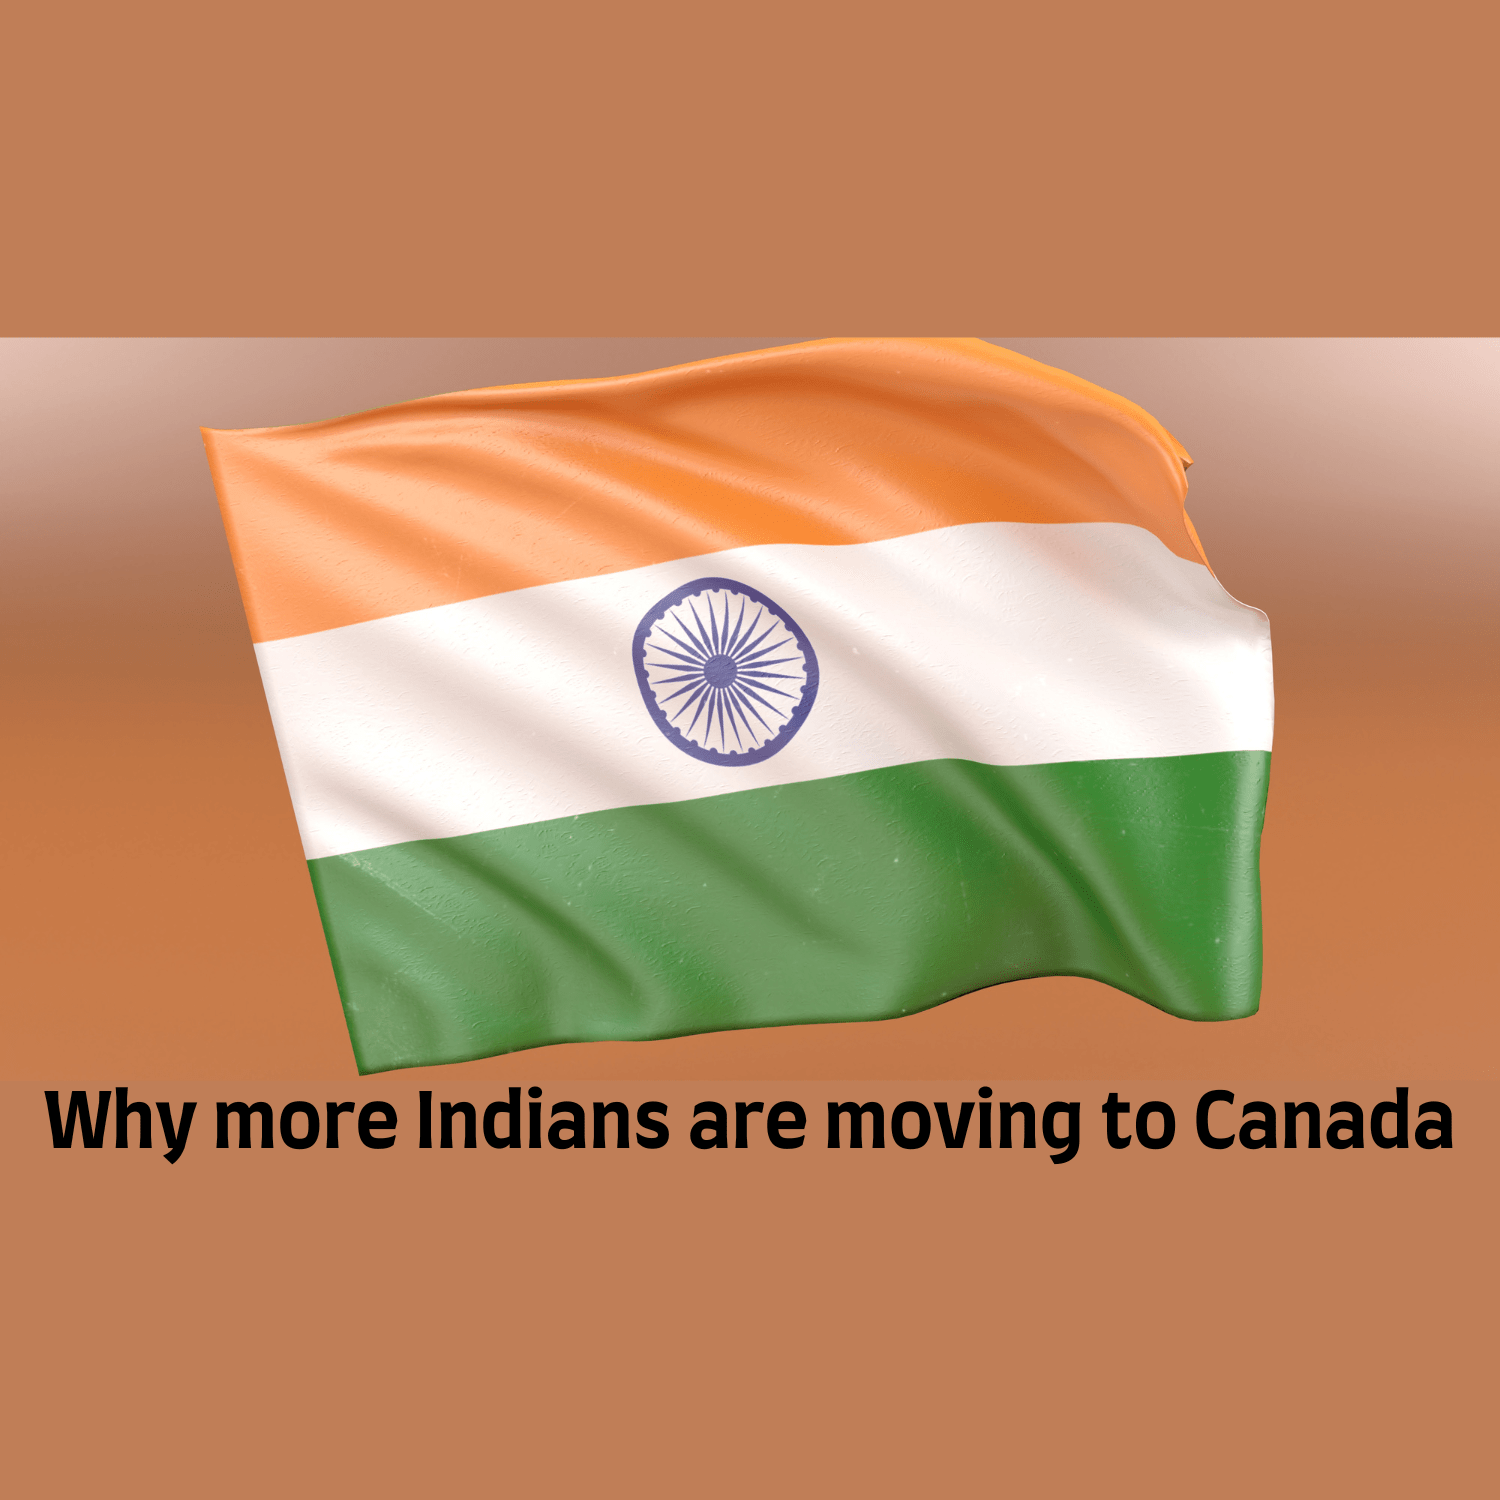 Why more Indians are moving to Canada